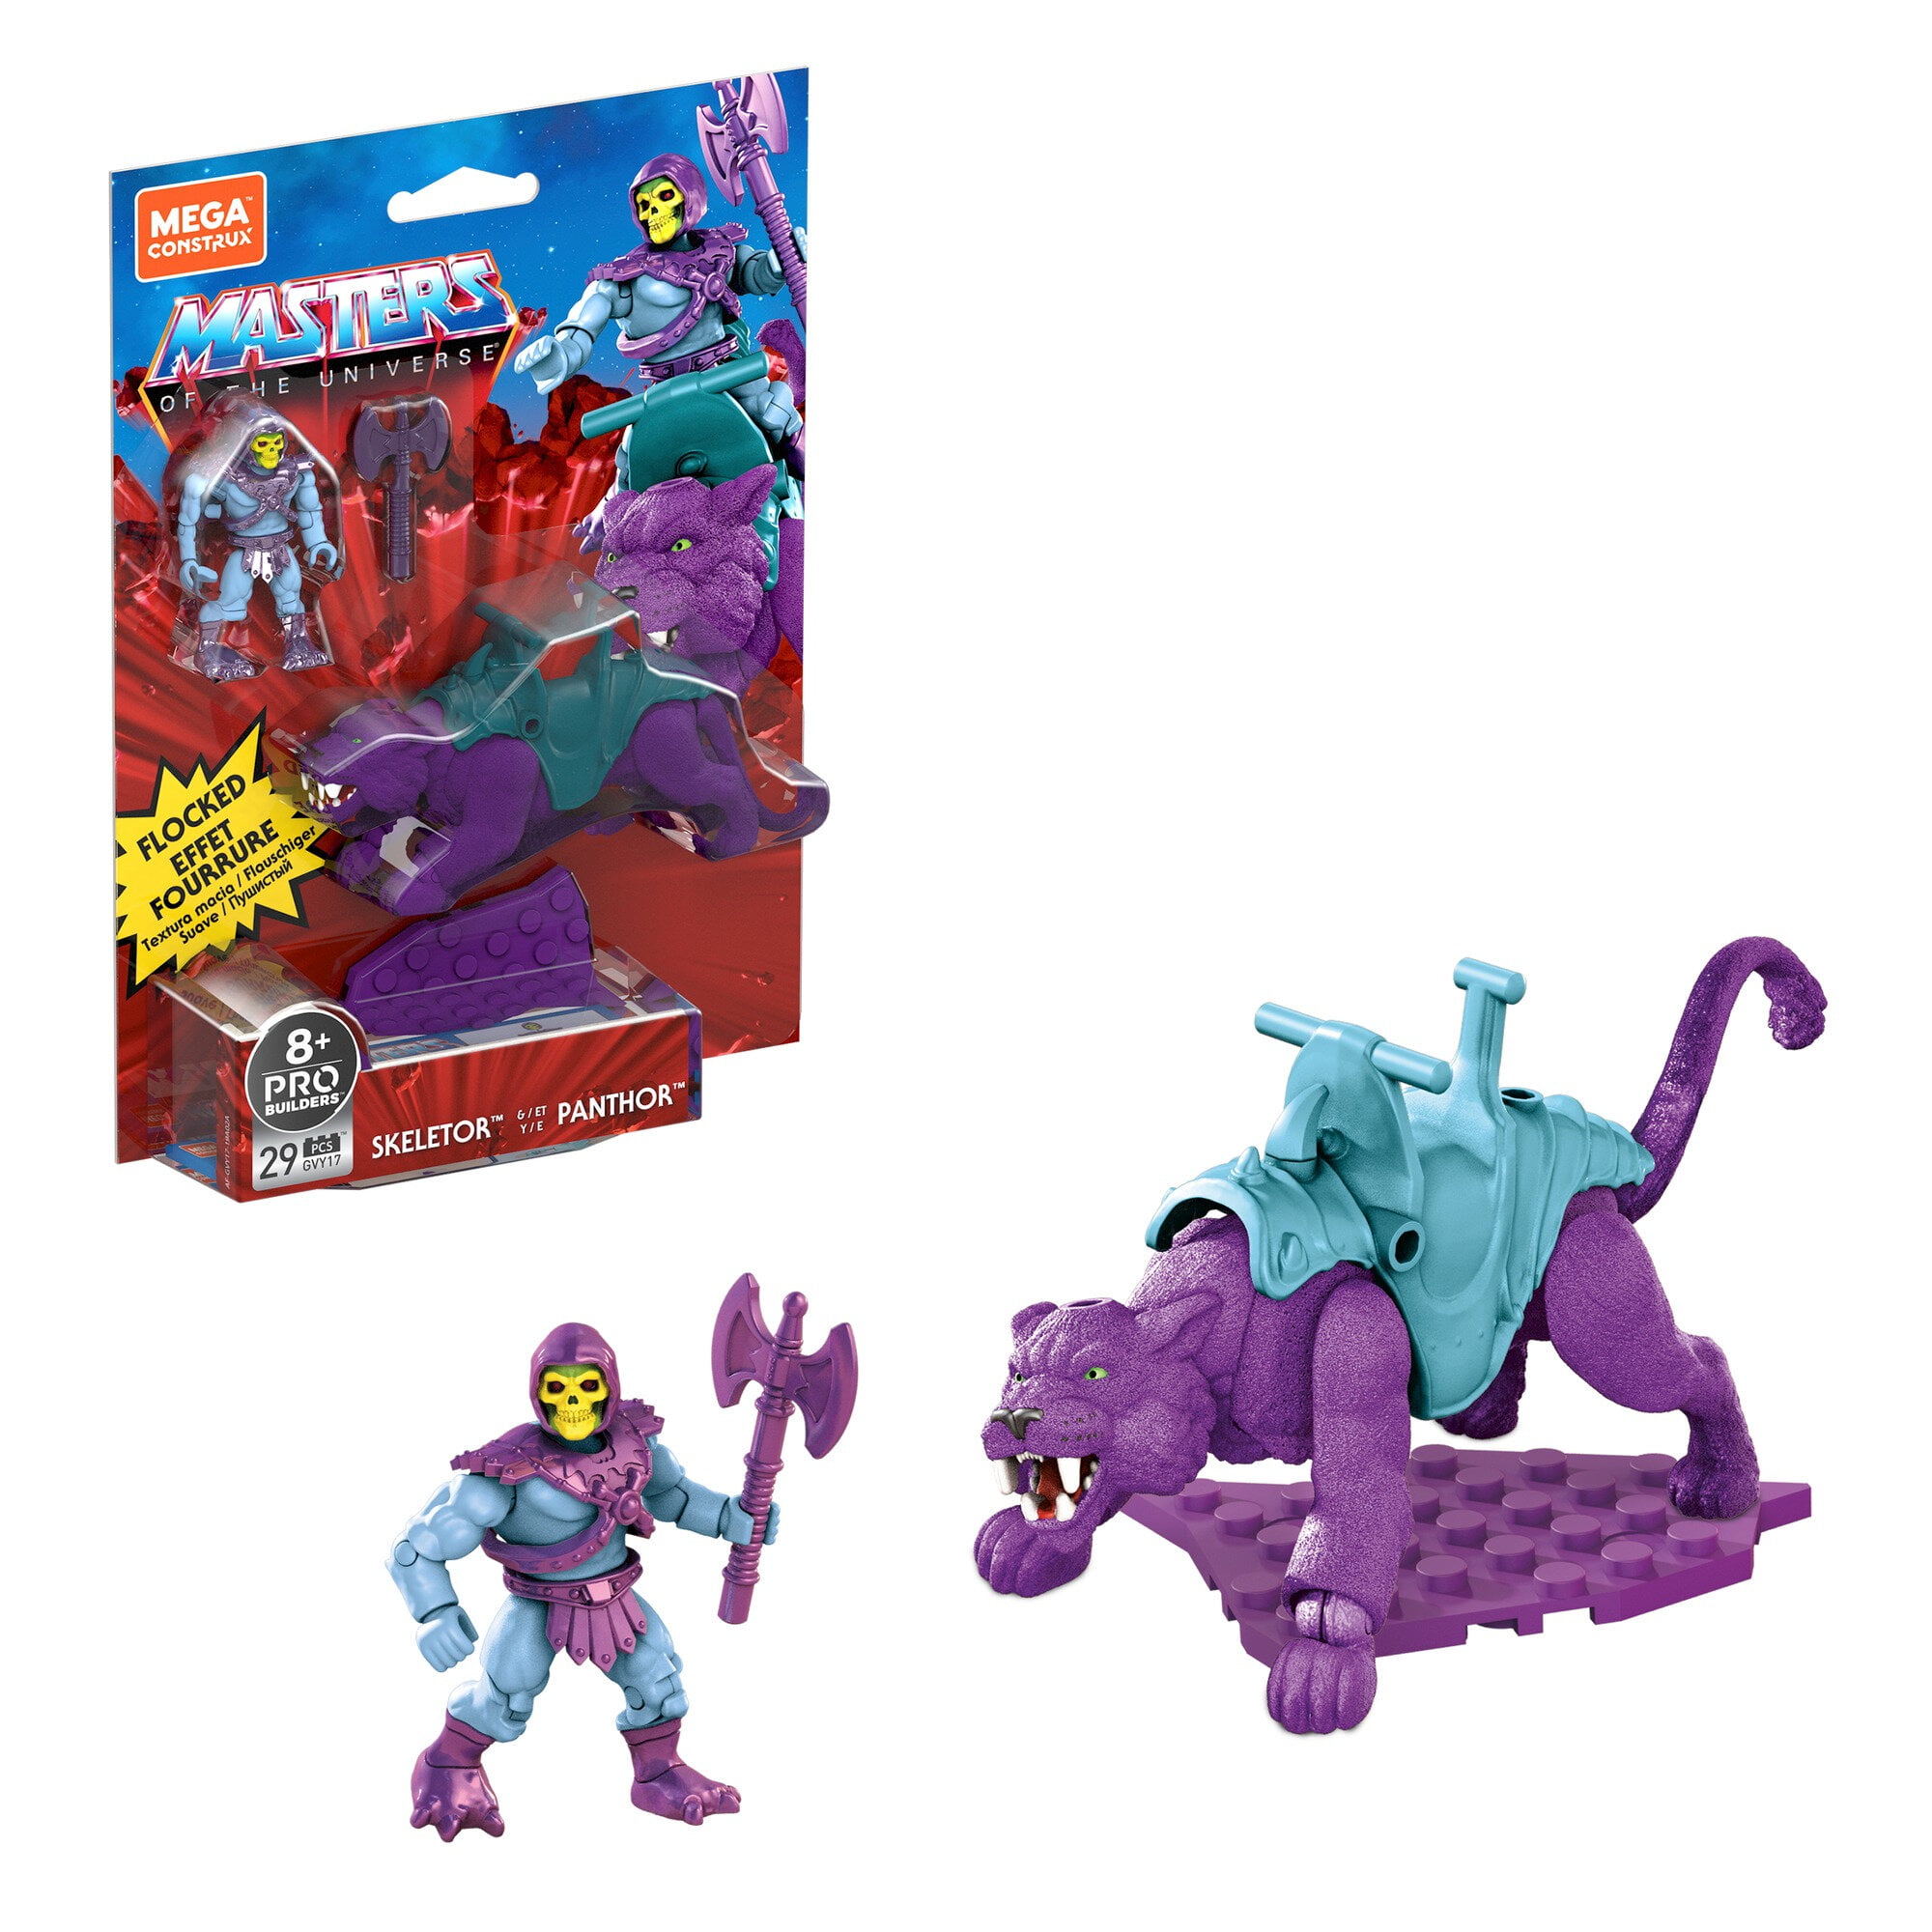 MEGA CONSTRUX MASTERS OF THE UNIVERSE SKELETOR IN HAND! 